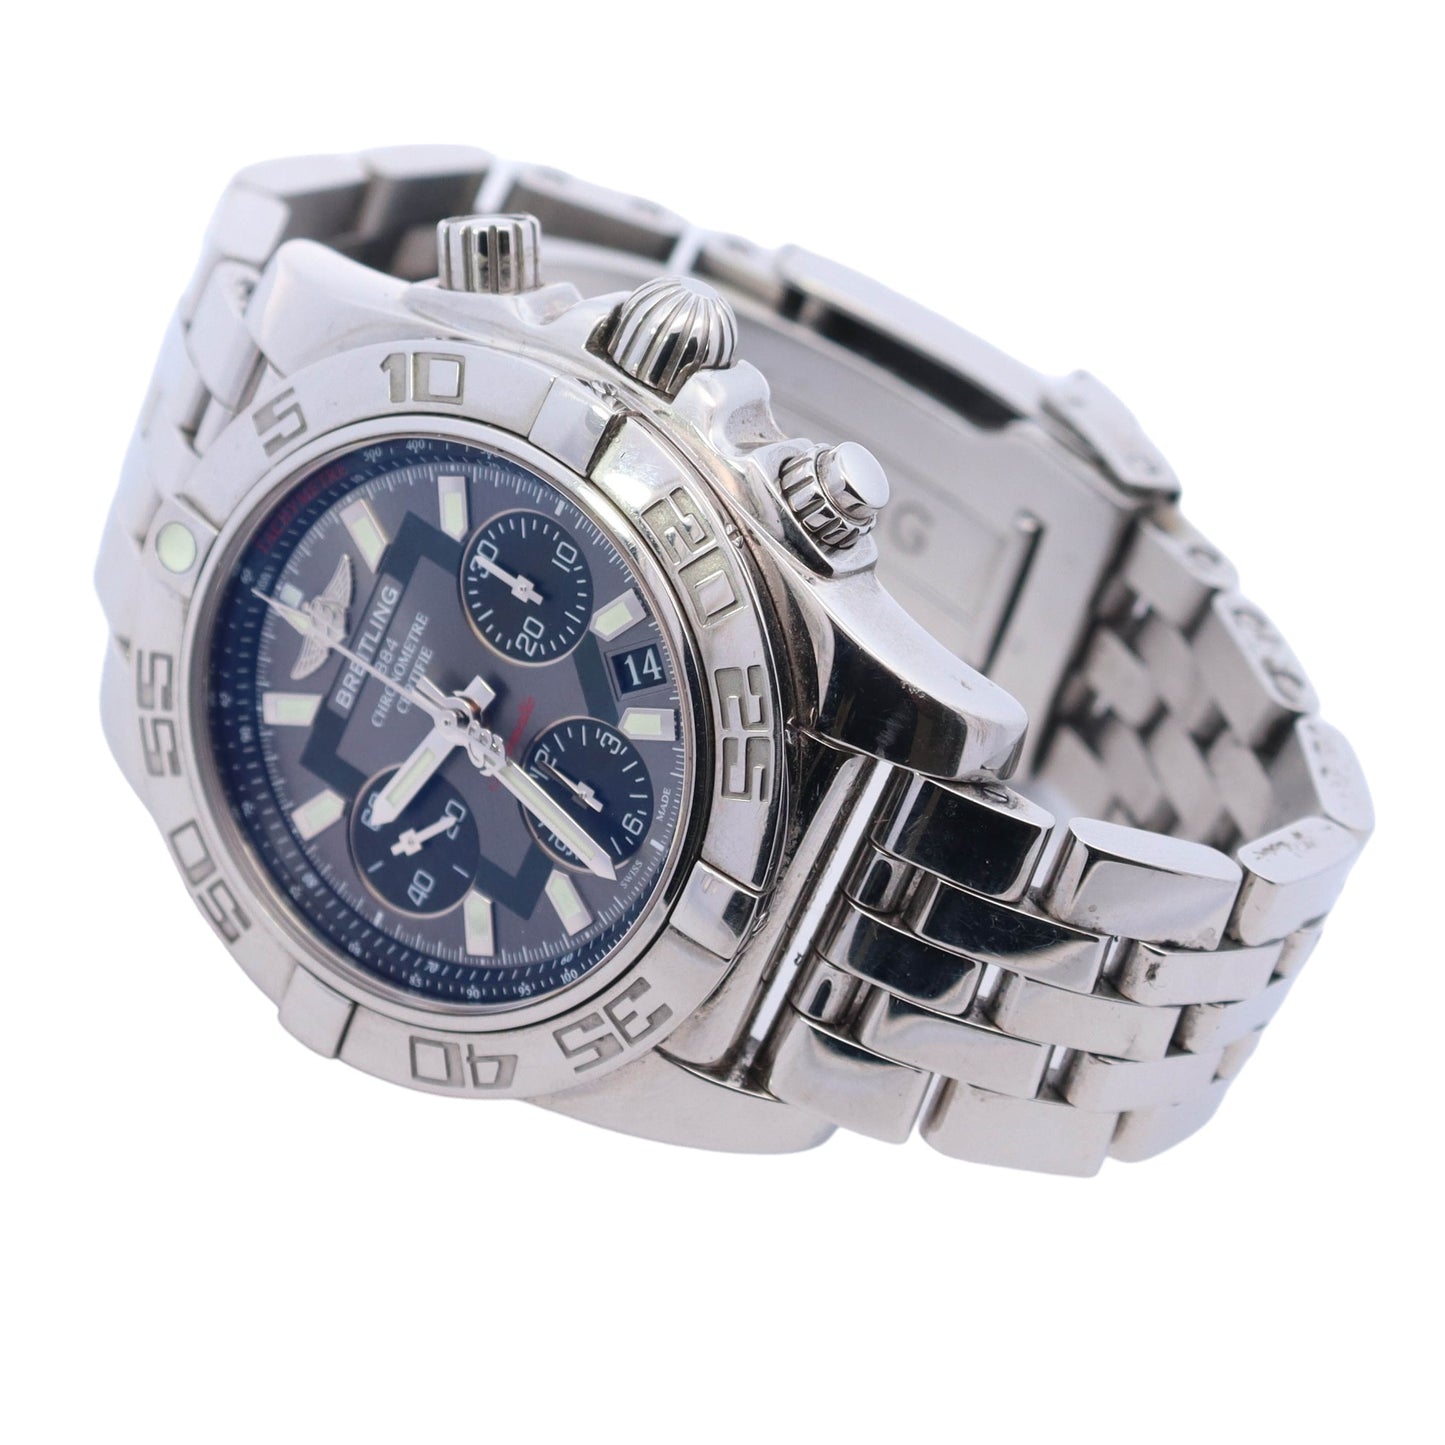 Breitling Chronomat Stainless Steel 41mm Grey Chronograph Dial Watch Reference #: AB014012/F554 - Happy Jewelers Fine Jewelry Lifetime Warranty